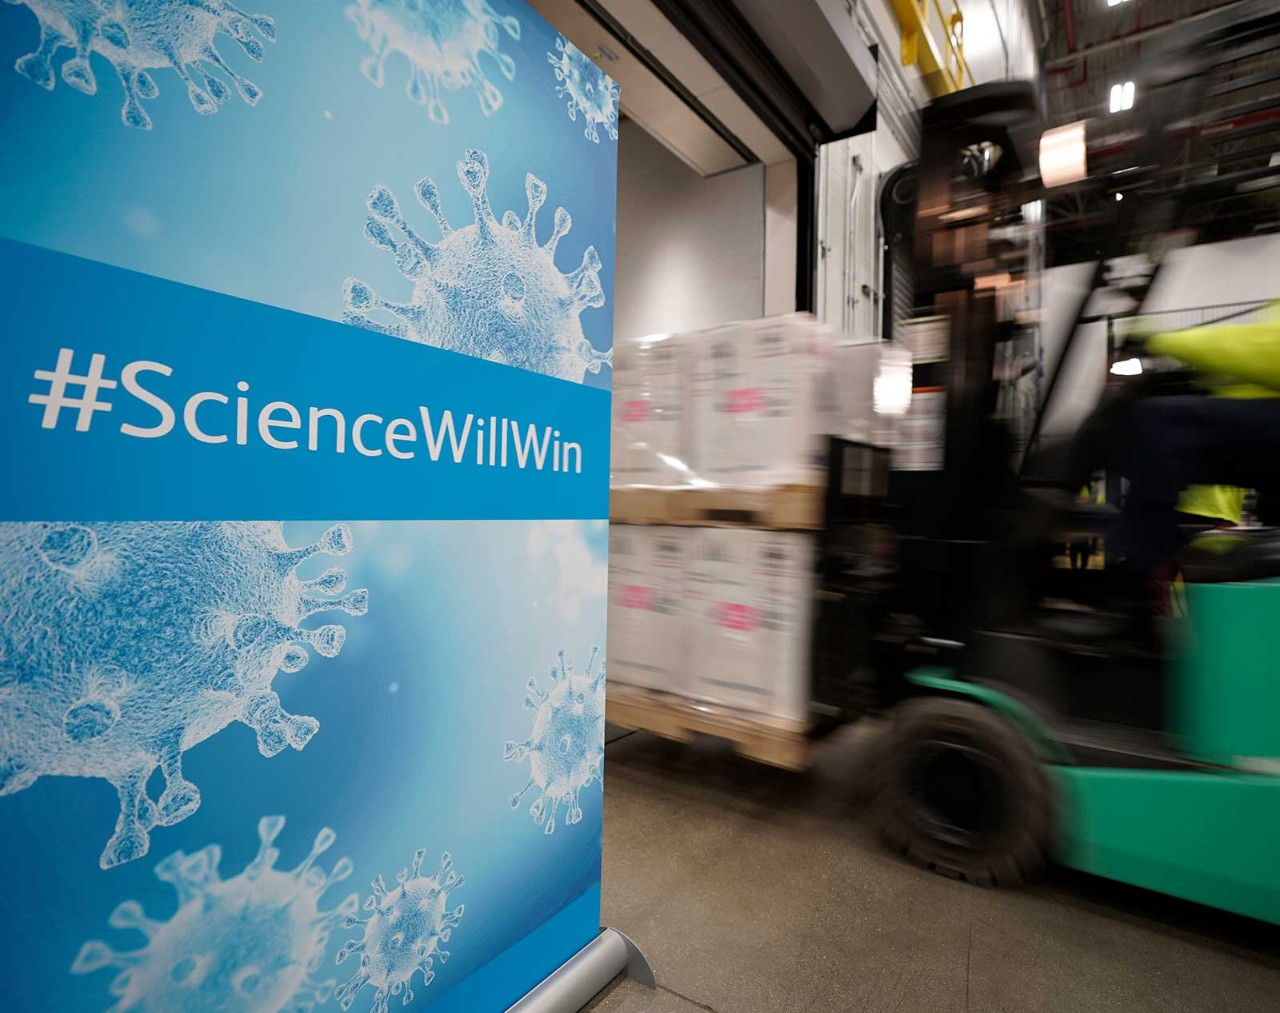 Boxes containing the Pfizer-BioNTech Covid-19 vaccine are prepared to be shipped from Pfizer's US manufacturing plant. The World Health Organization’s Covax facility aims to ensure the vaccine is procured smoothly across the globe